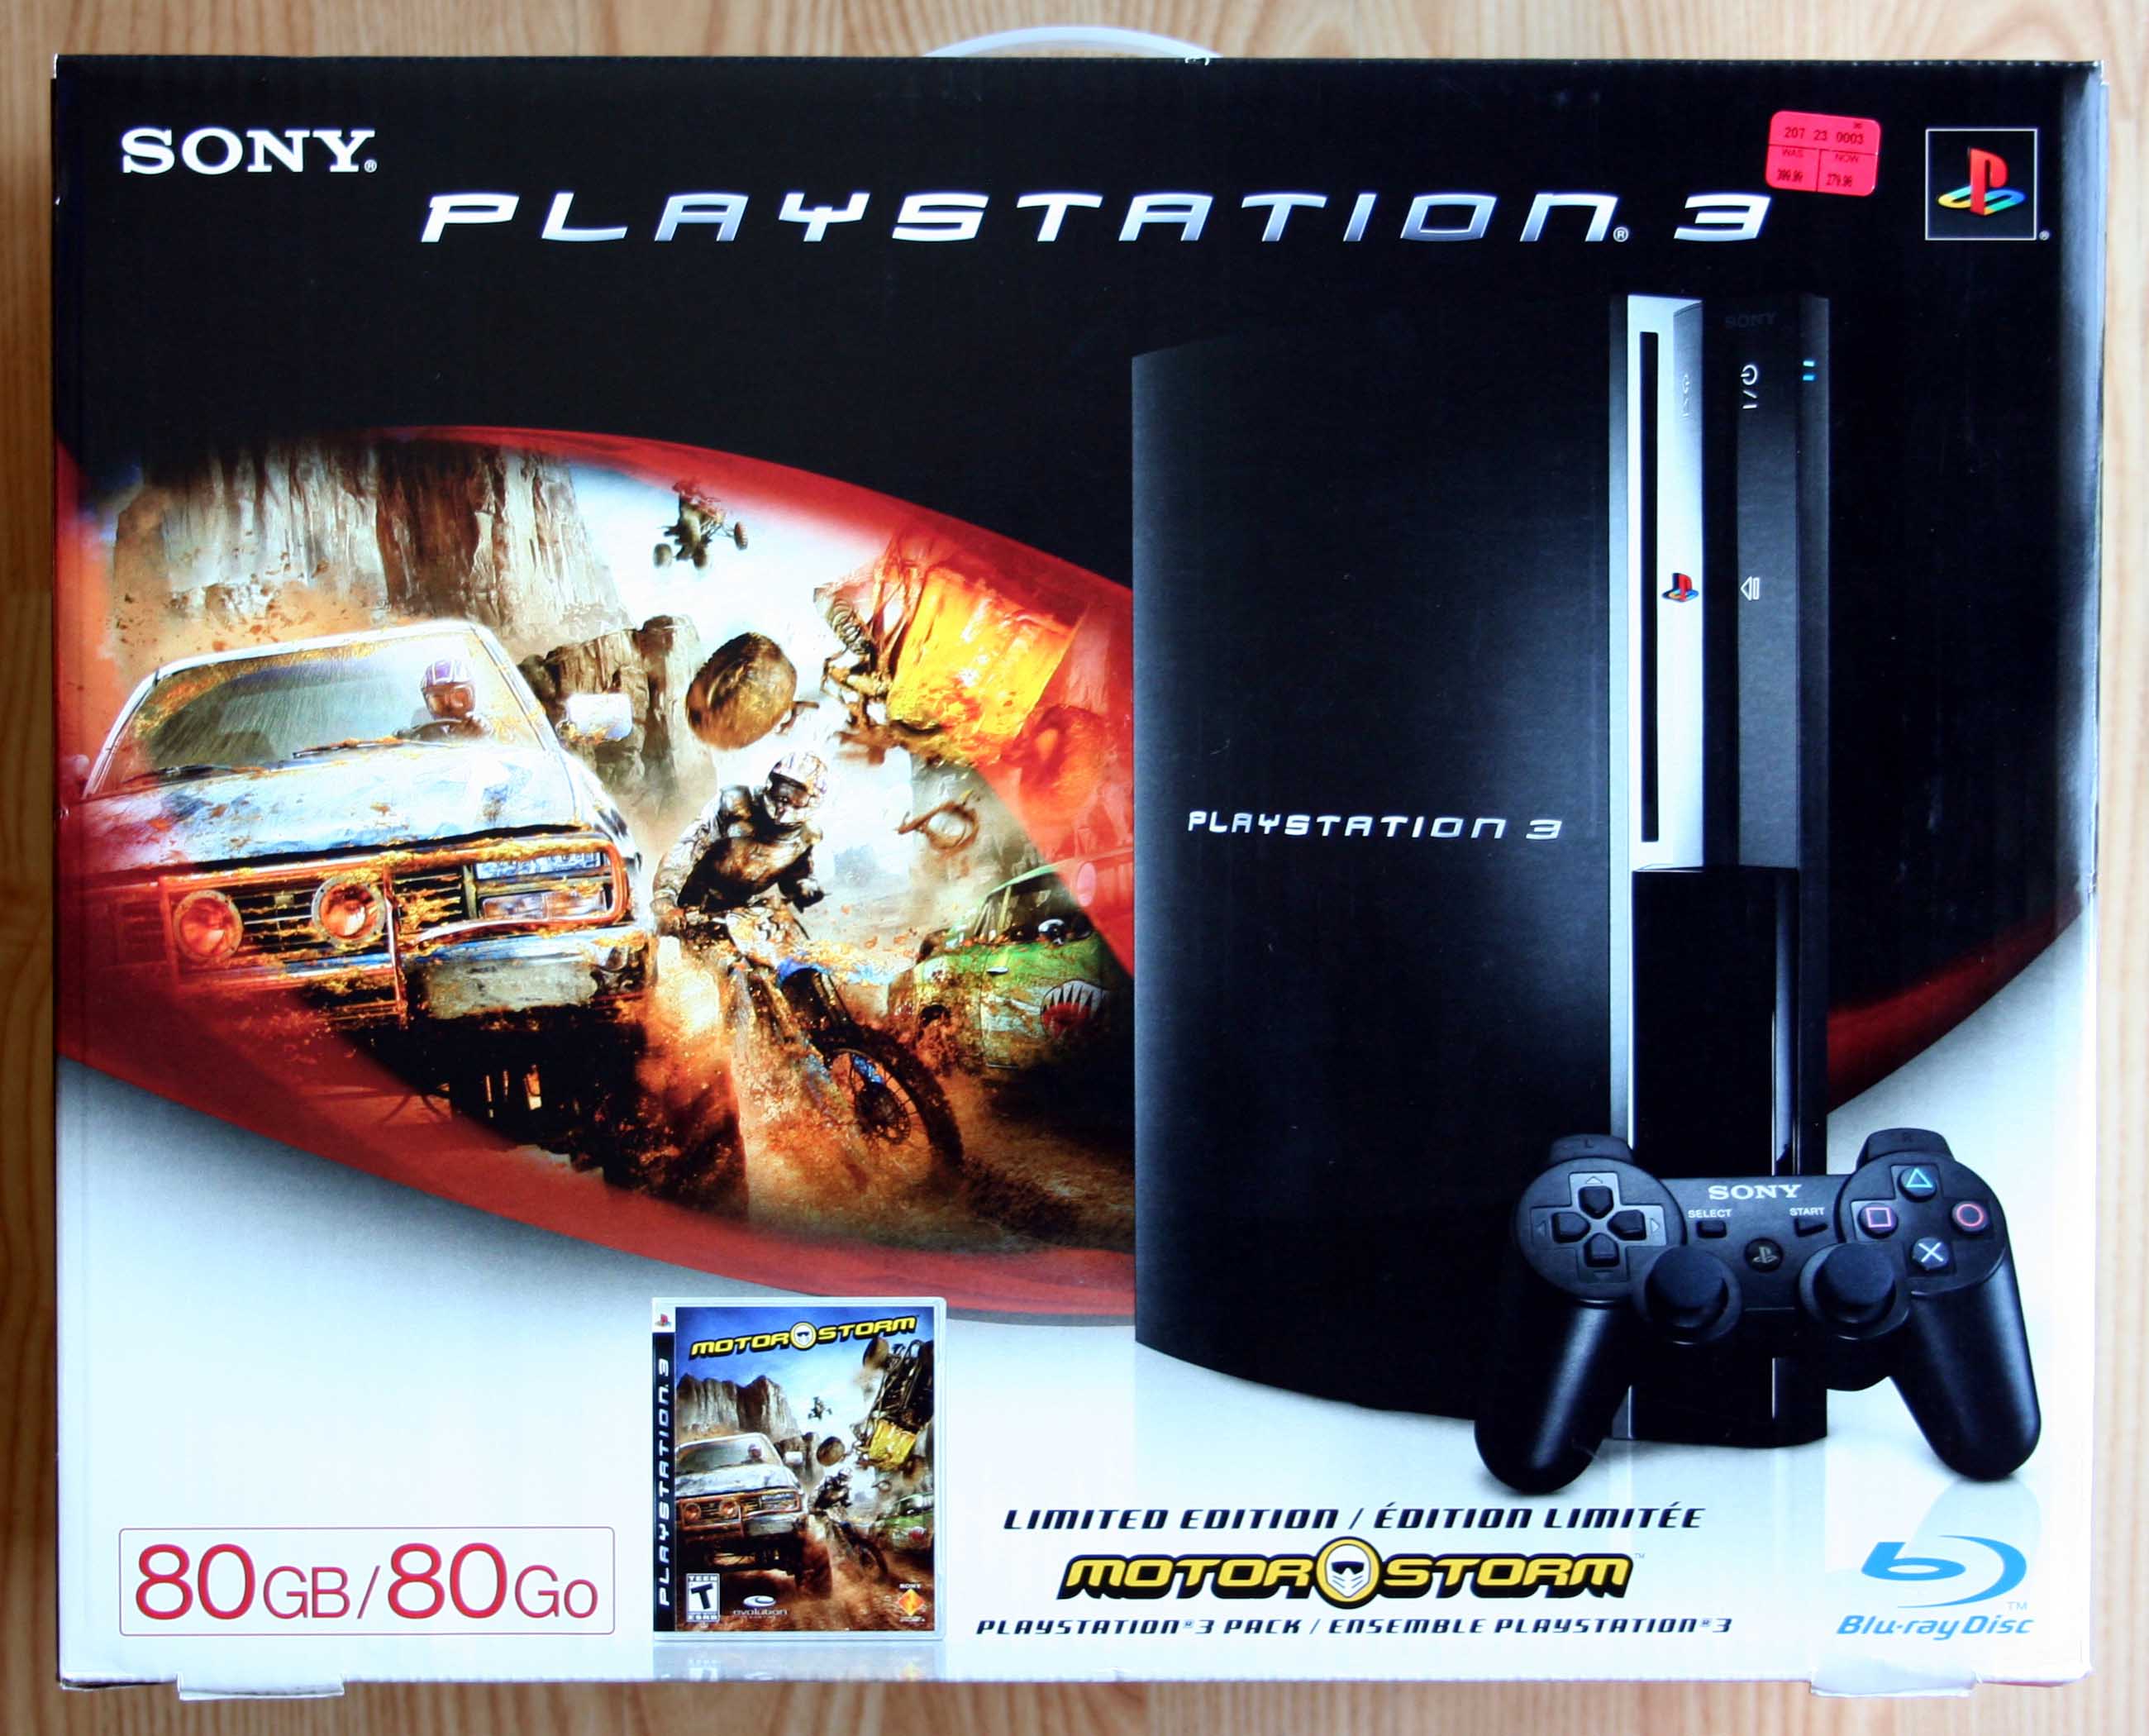 Sony Launching a 80GB PS3 for $599